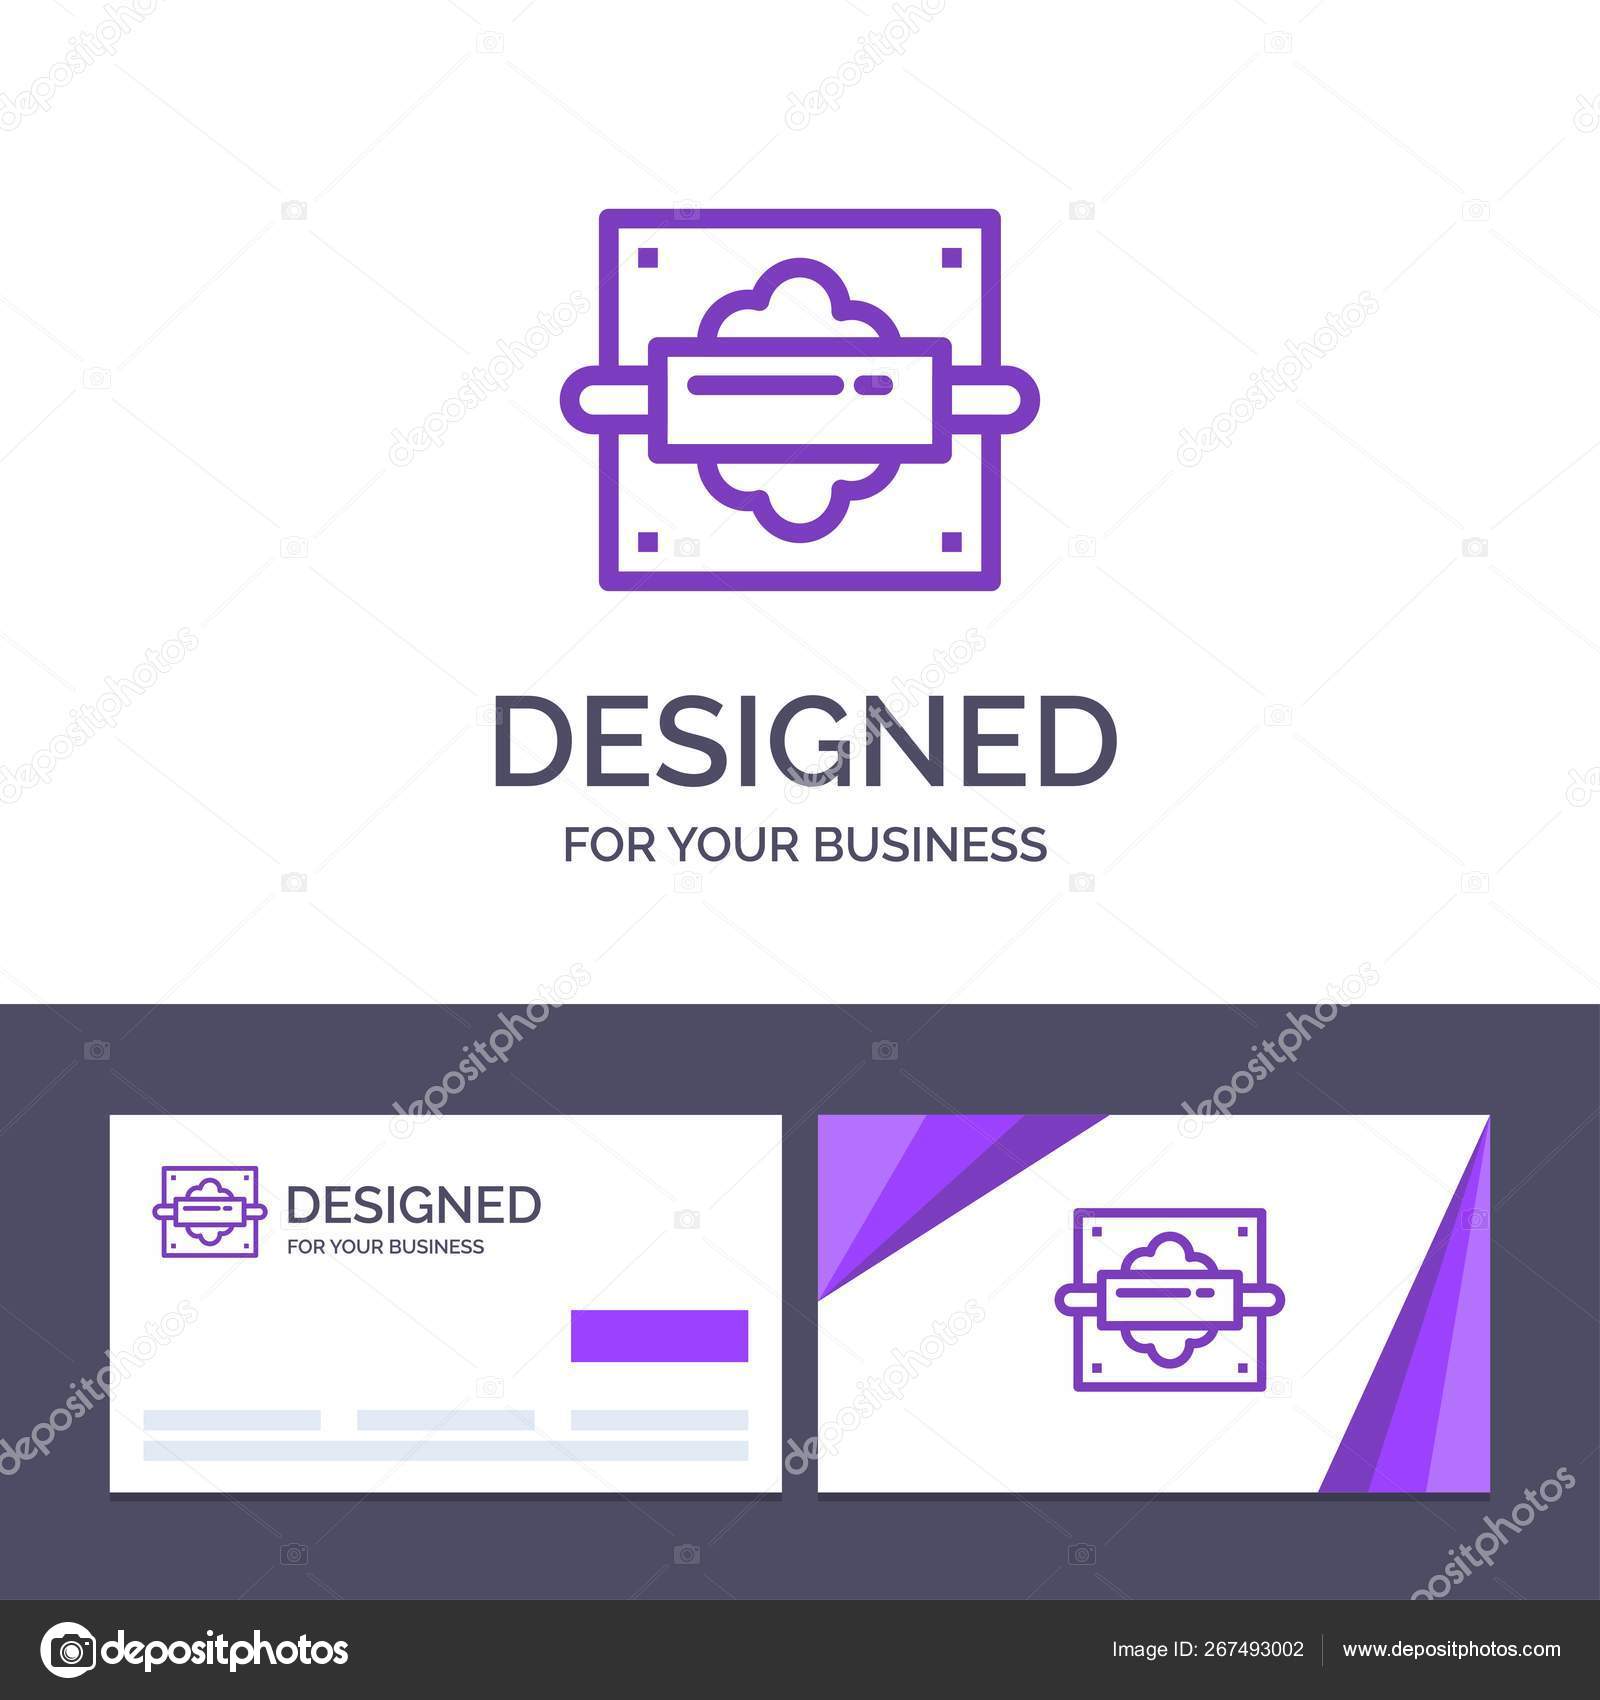 Pin on Business Card Design